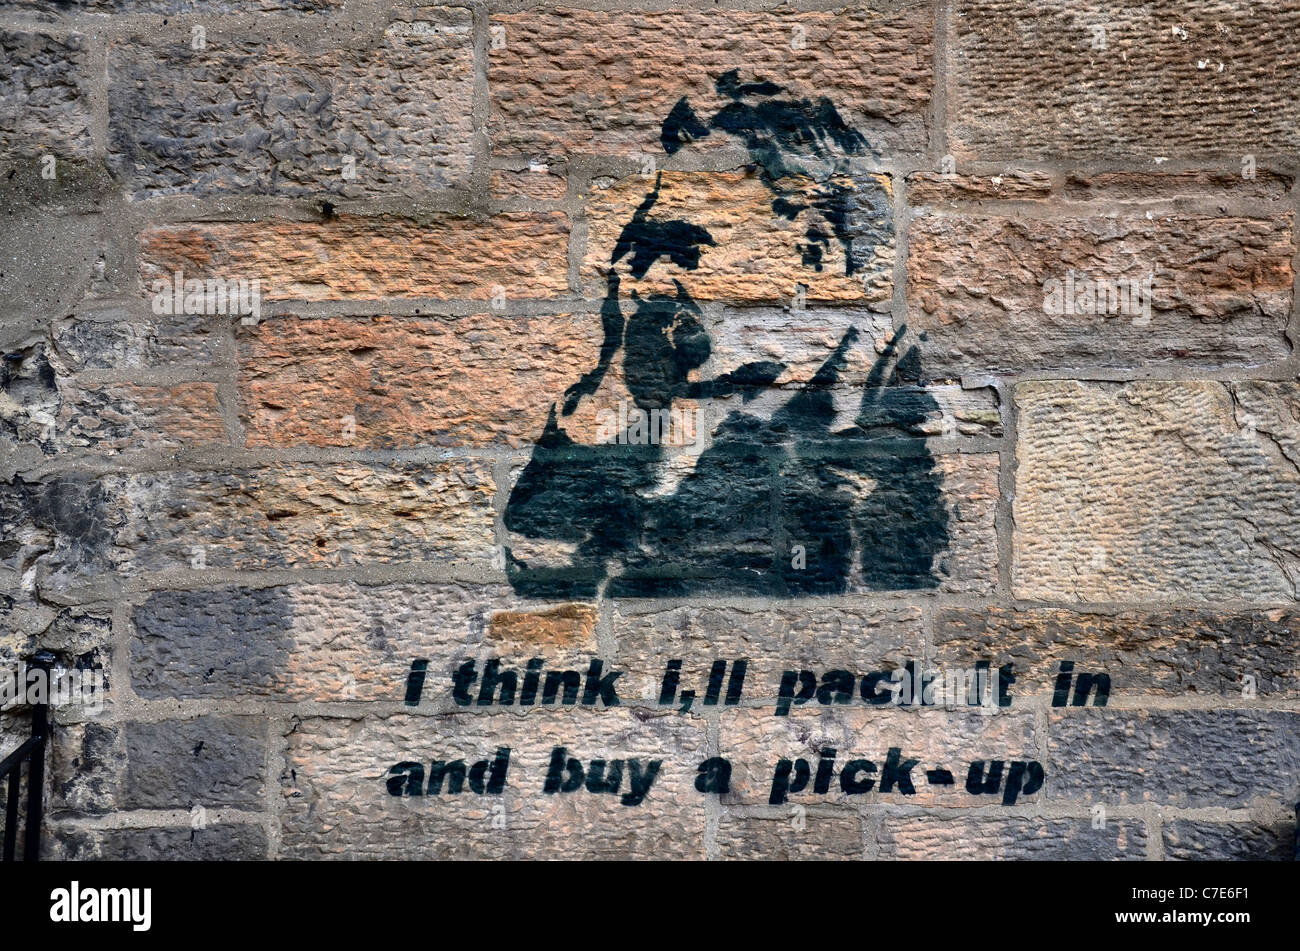 Stencil Graffiti With A Quote From A Neil Young Song On A Wall In Edinburgh Scotland Stock Photo Alamy